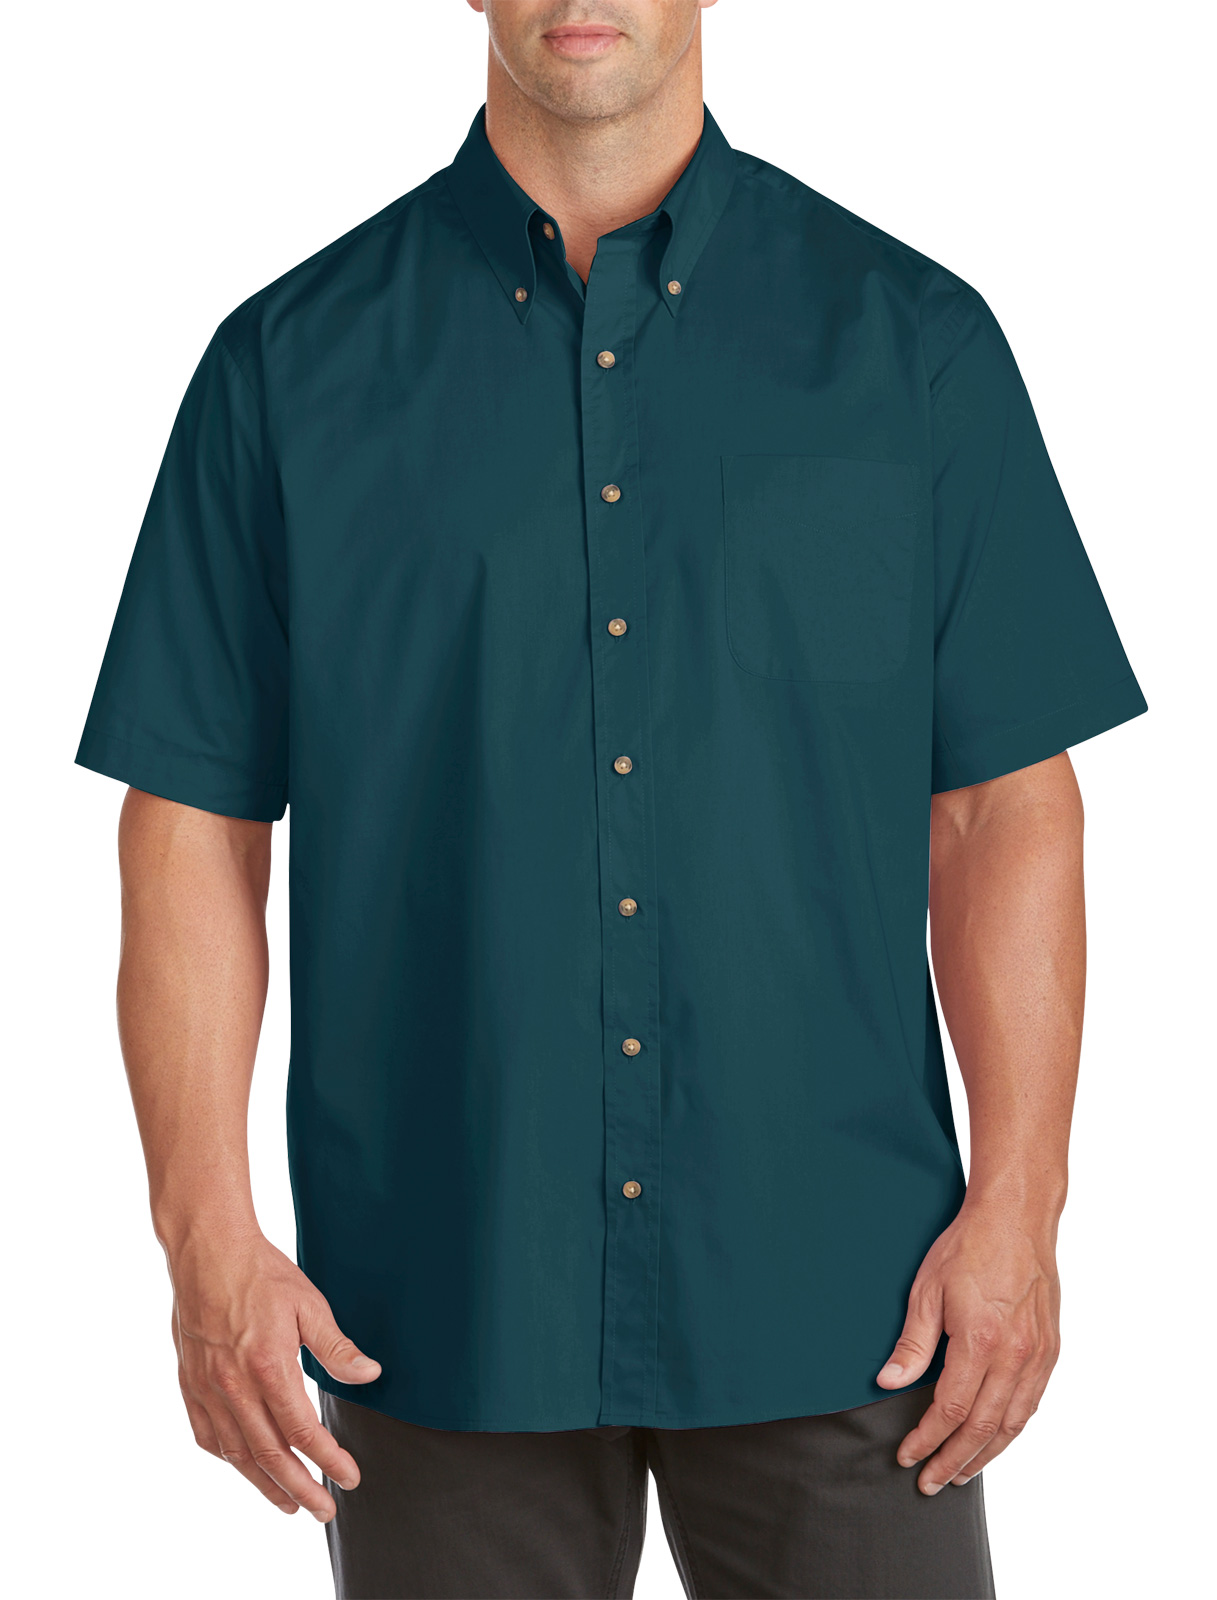 Harbor Bay Men's Big and Tall Easy-Care Solid Sport Shirt